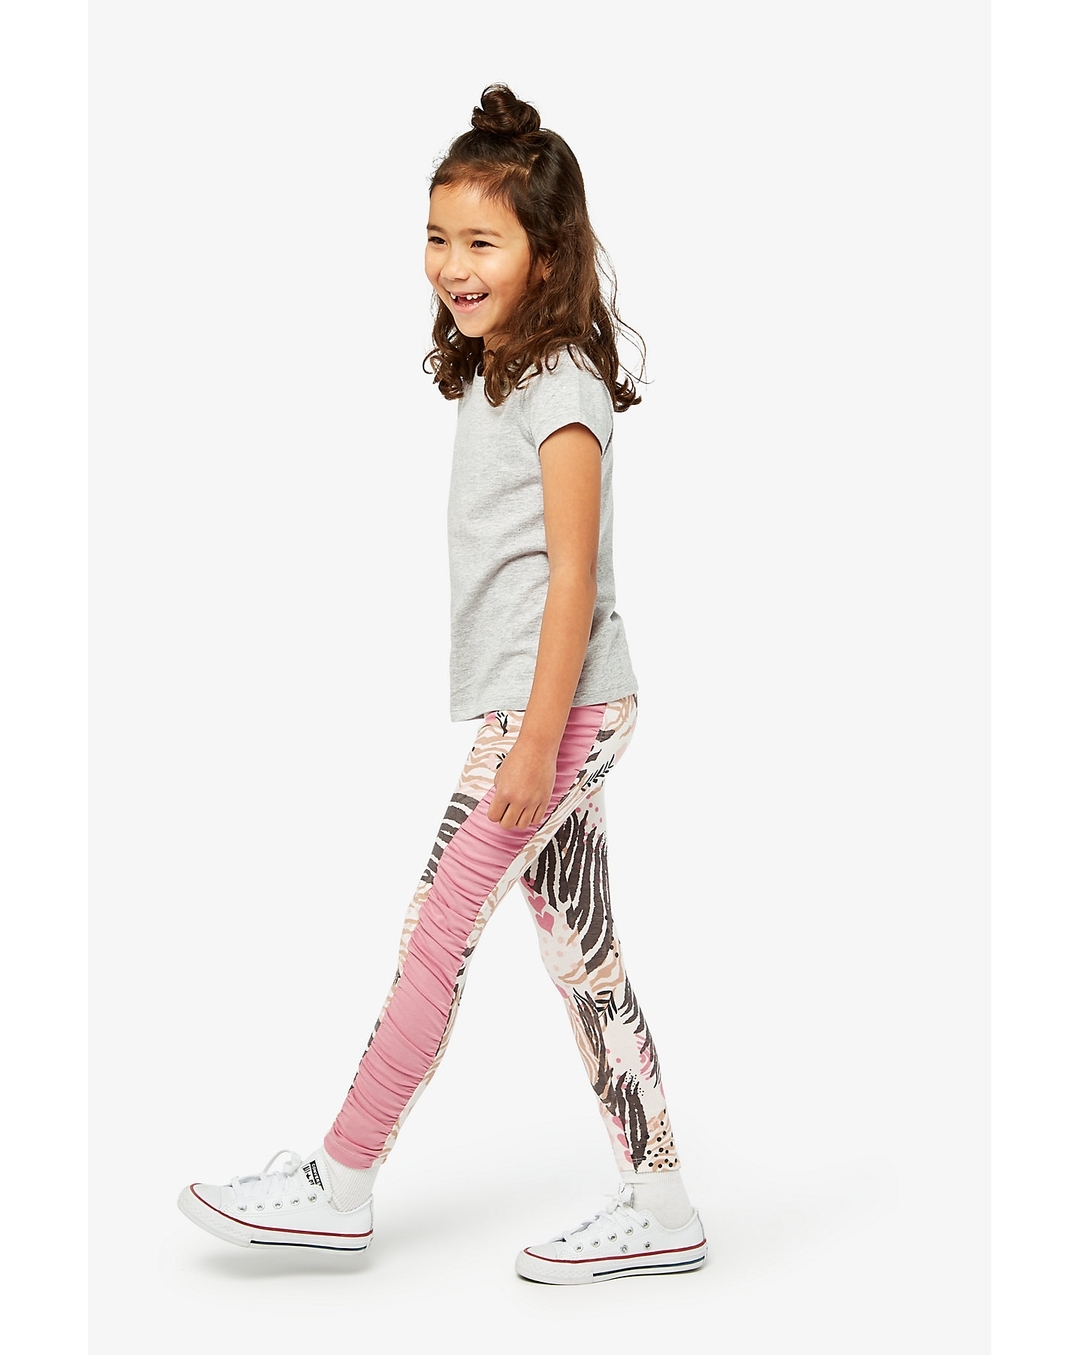 Buy De Moza Kids - Girls Ankle Length Leggings Printed Cotton Baby Pink at  Amazon.in